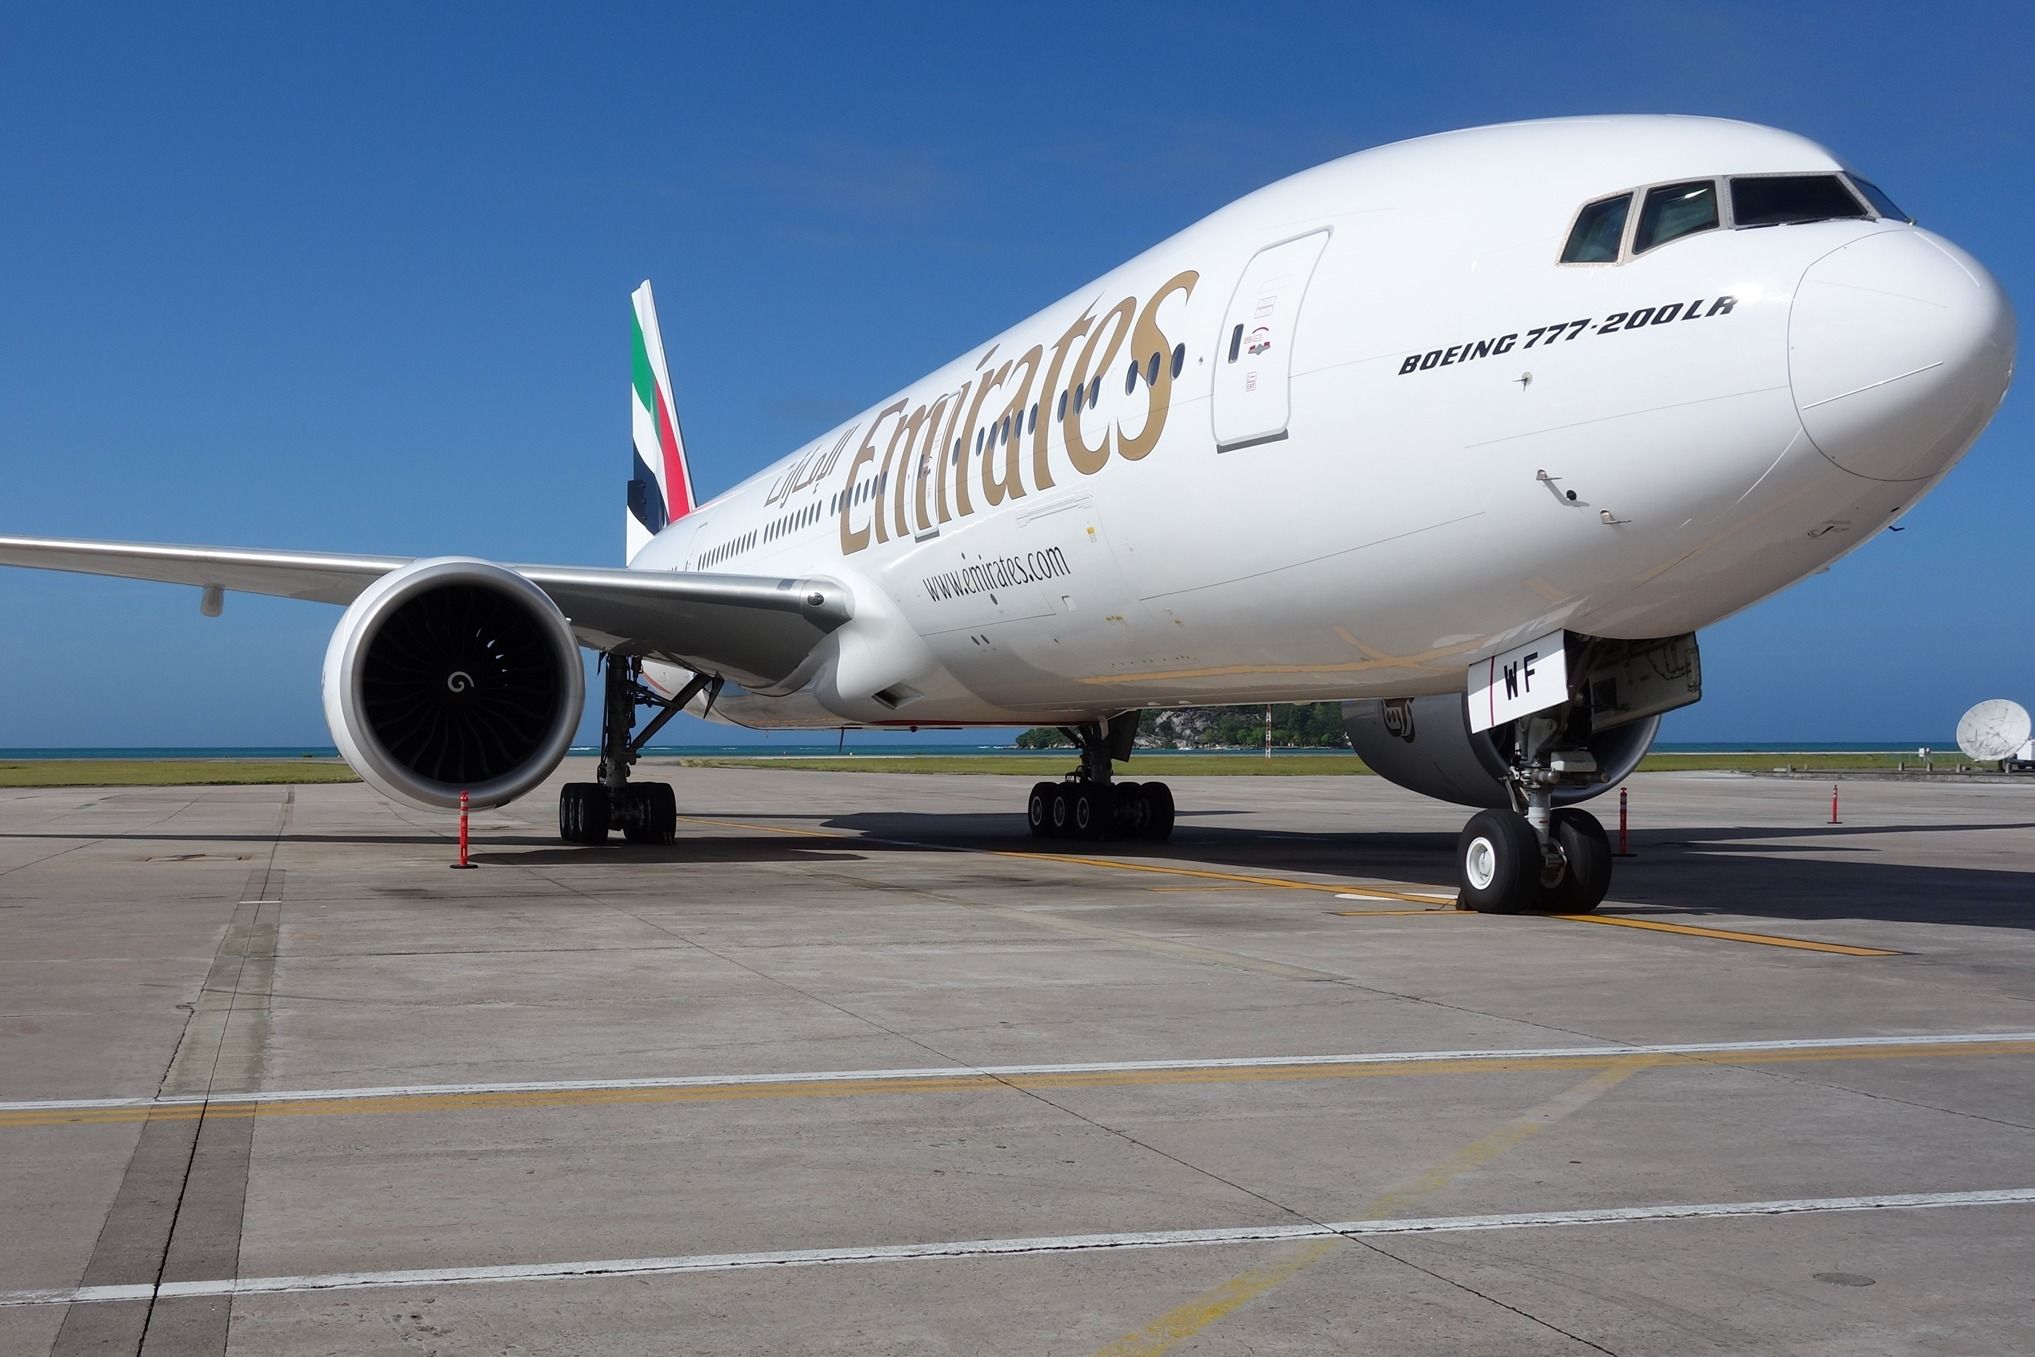 Emirates Boeing 777-200LR parked on the apron